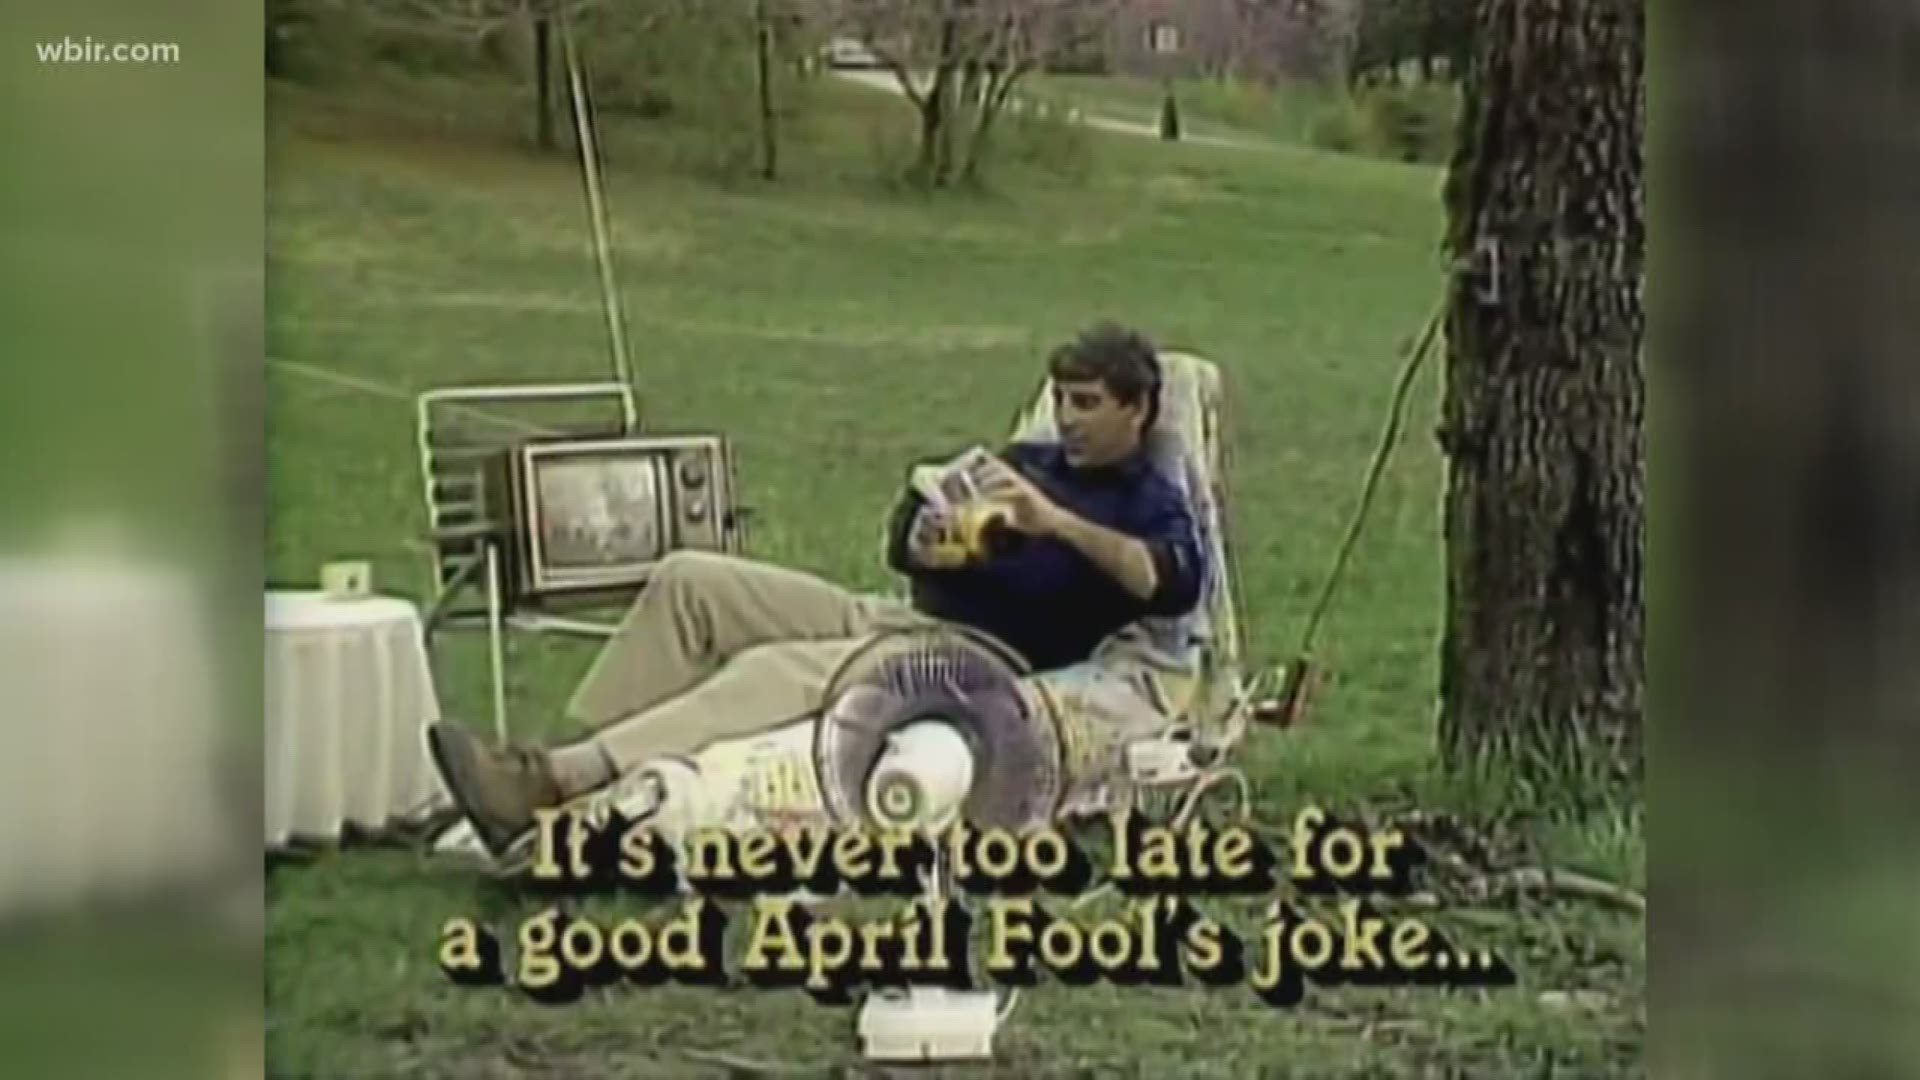 today is April Fools' Day, but we're not playing any tricks. Instead, we wanted to take a look back in the wbir heartland series vault.... for